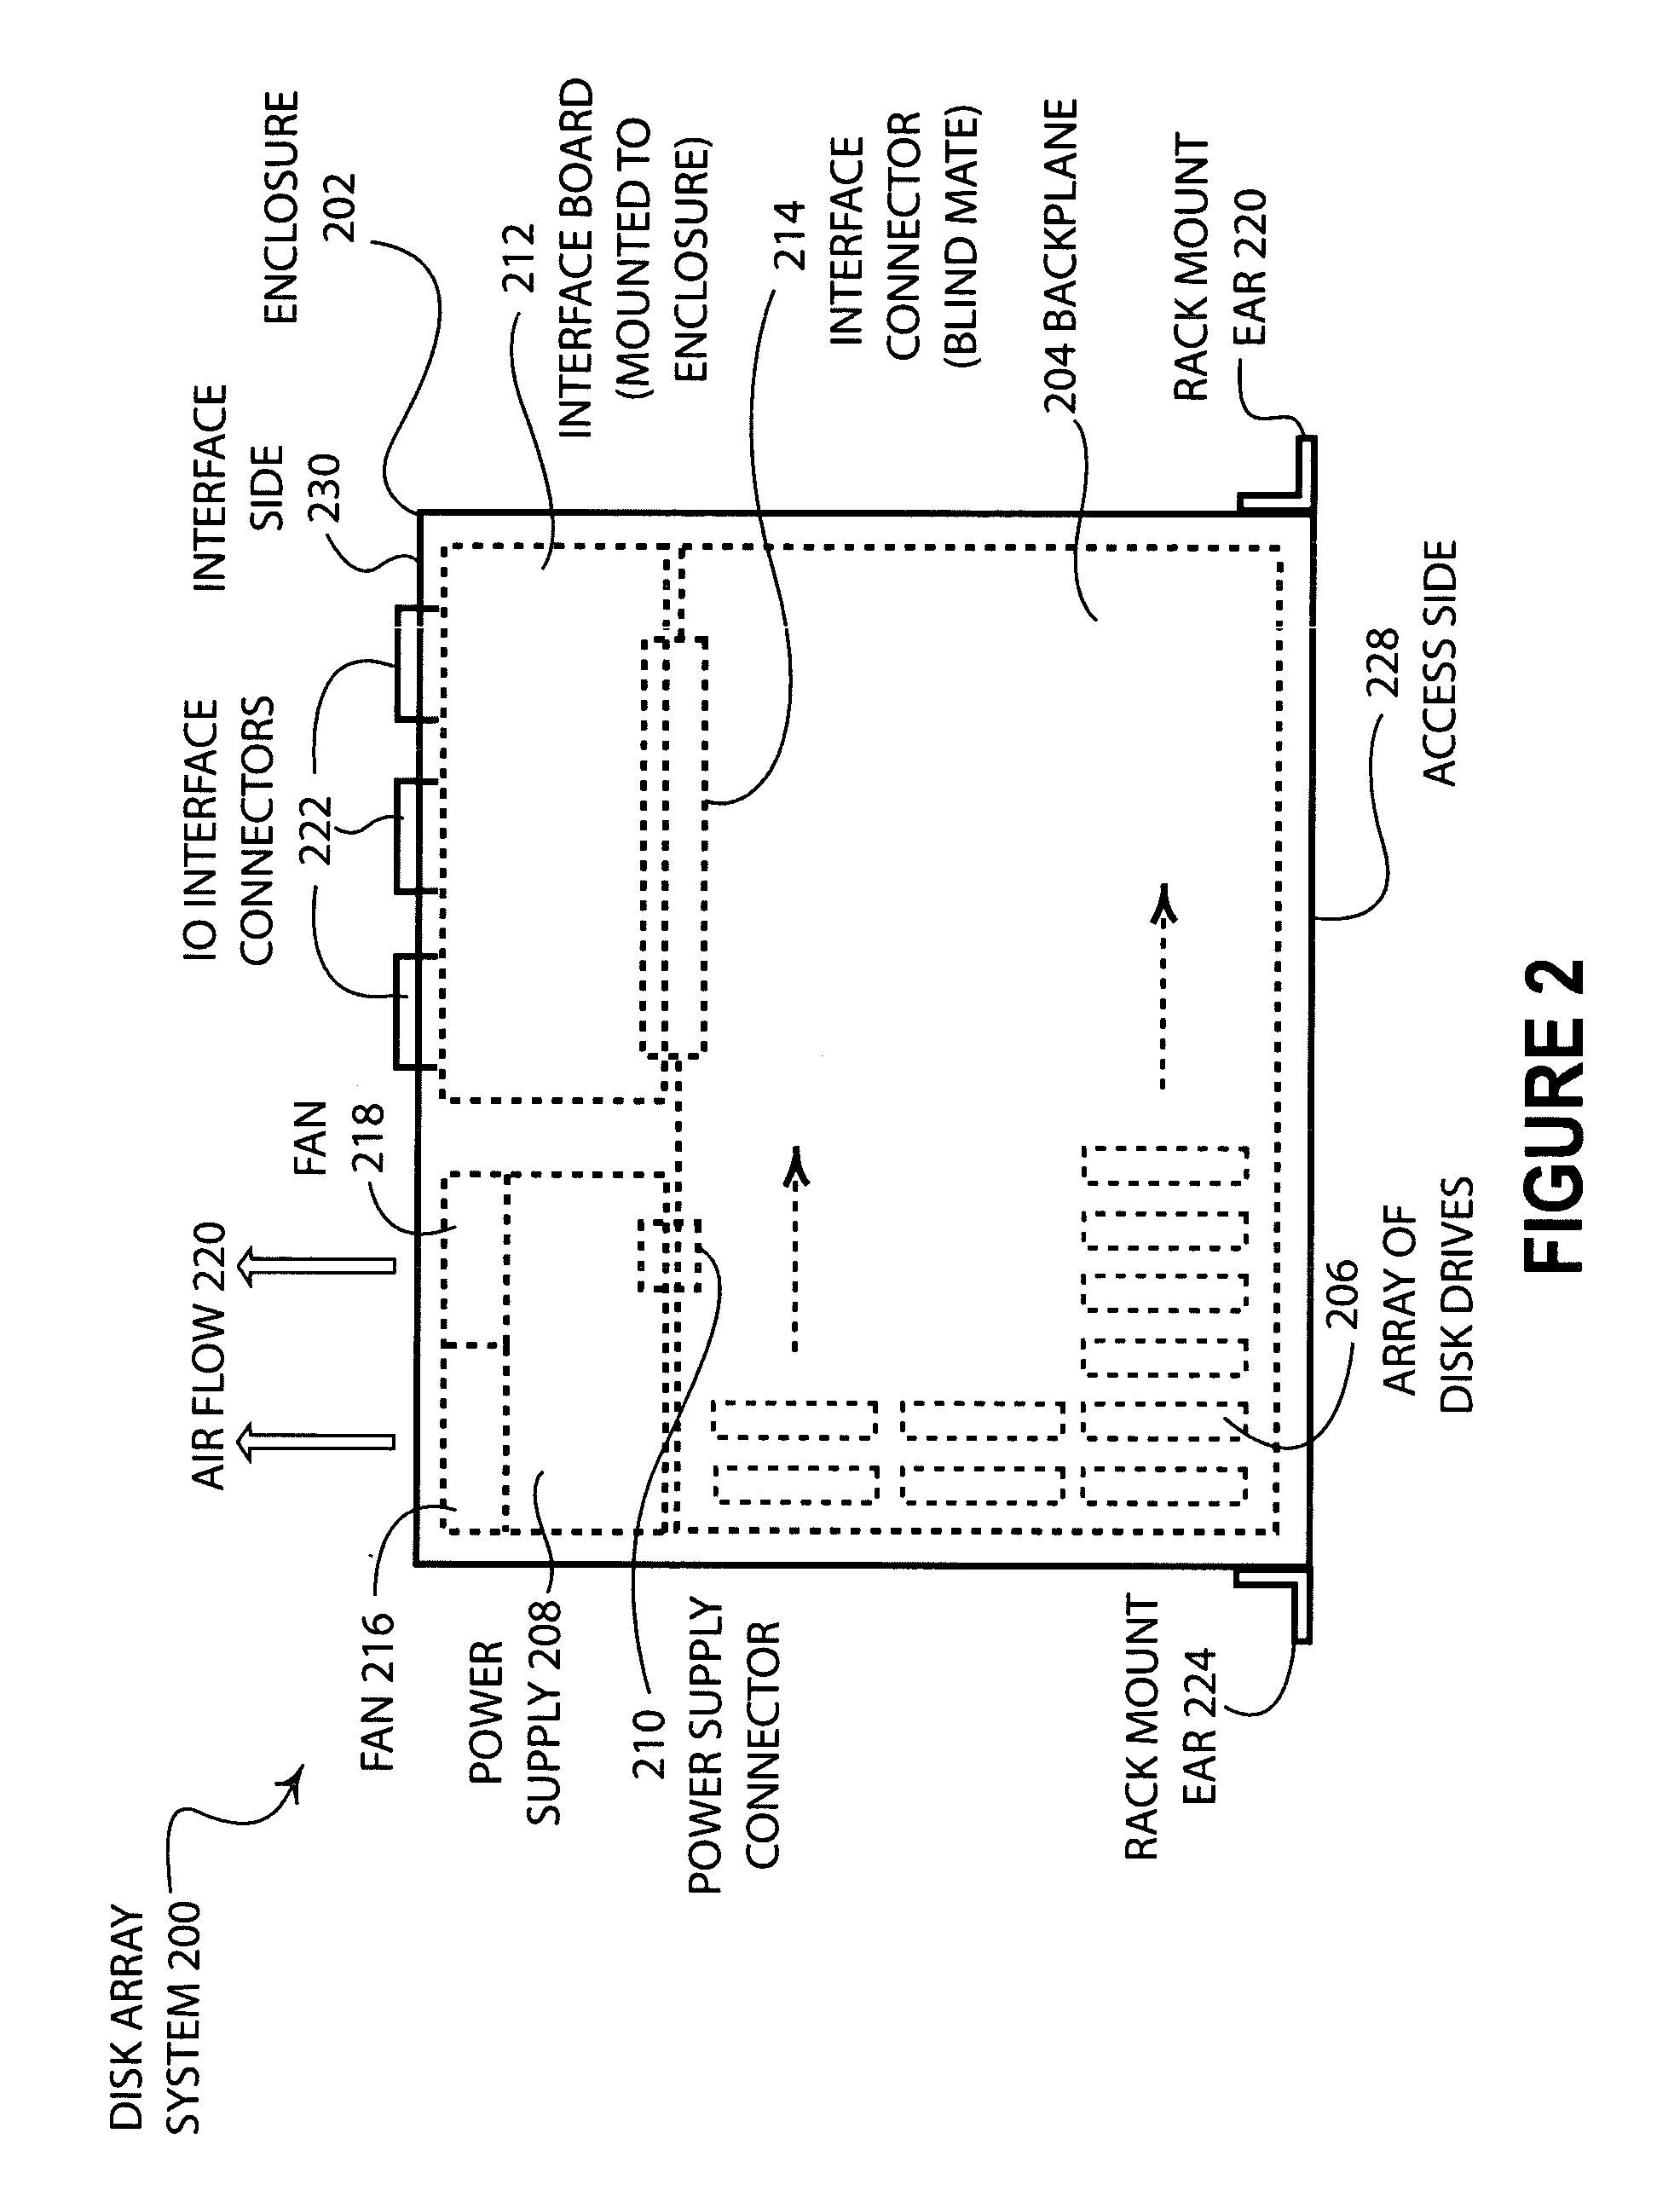 Data storage system with a removable backplane having a array of disk drives